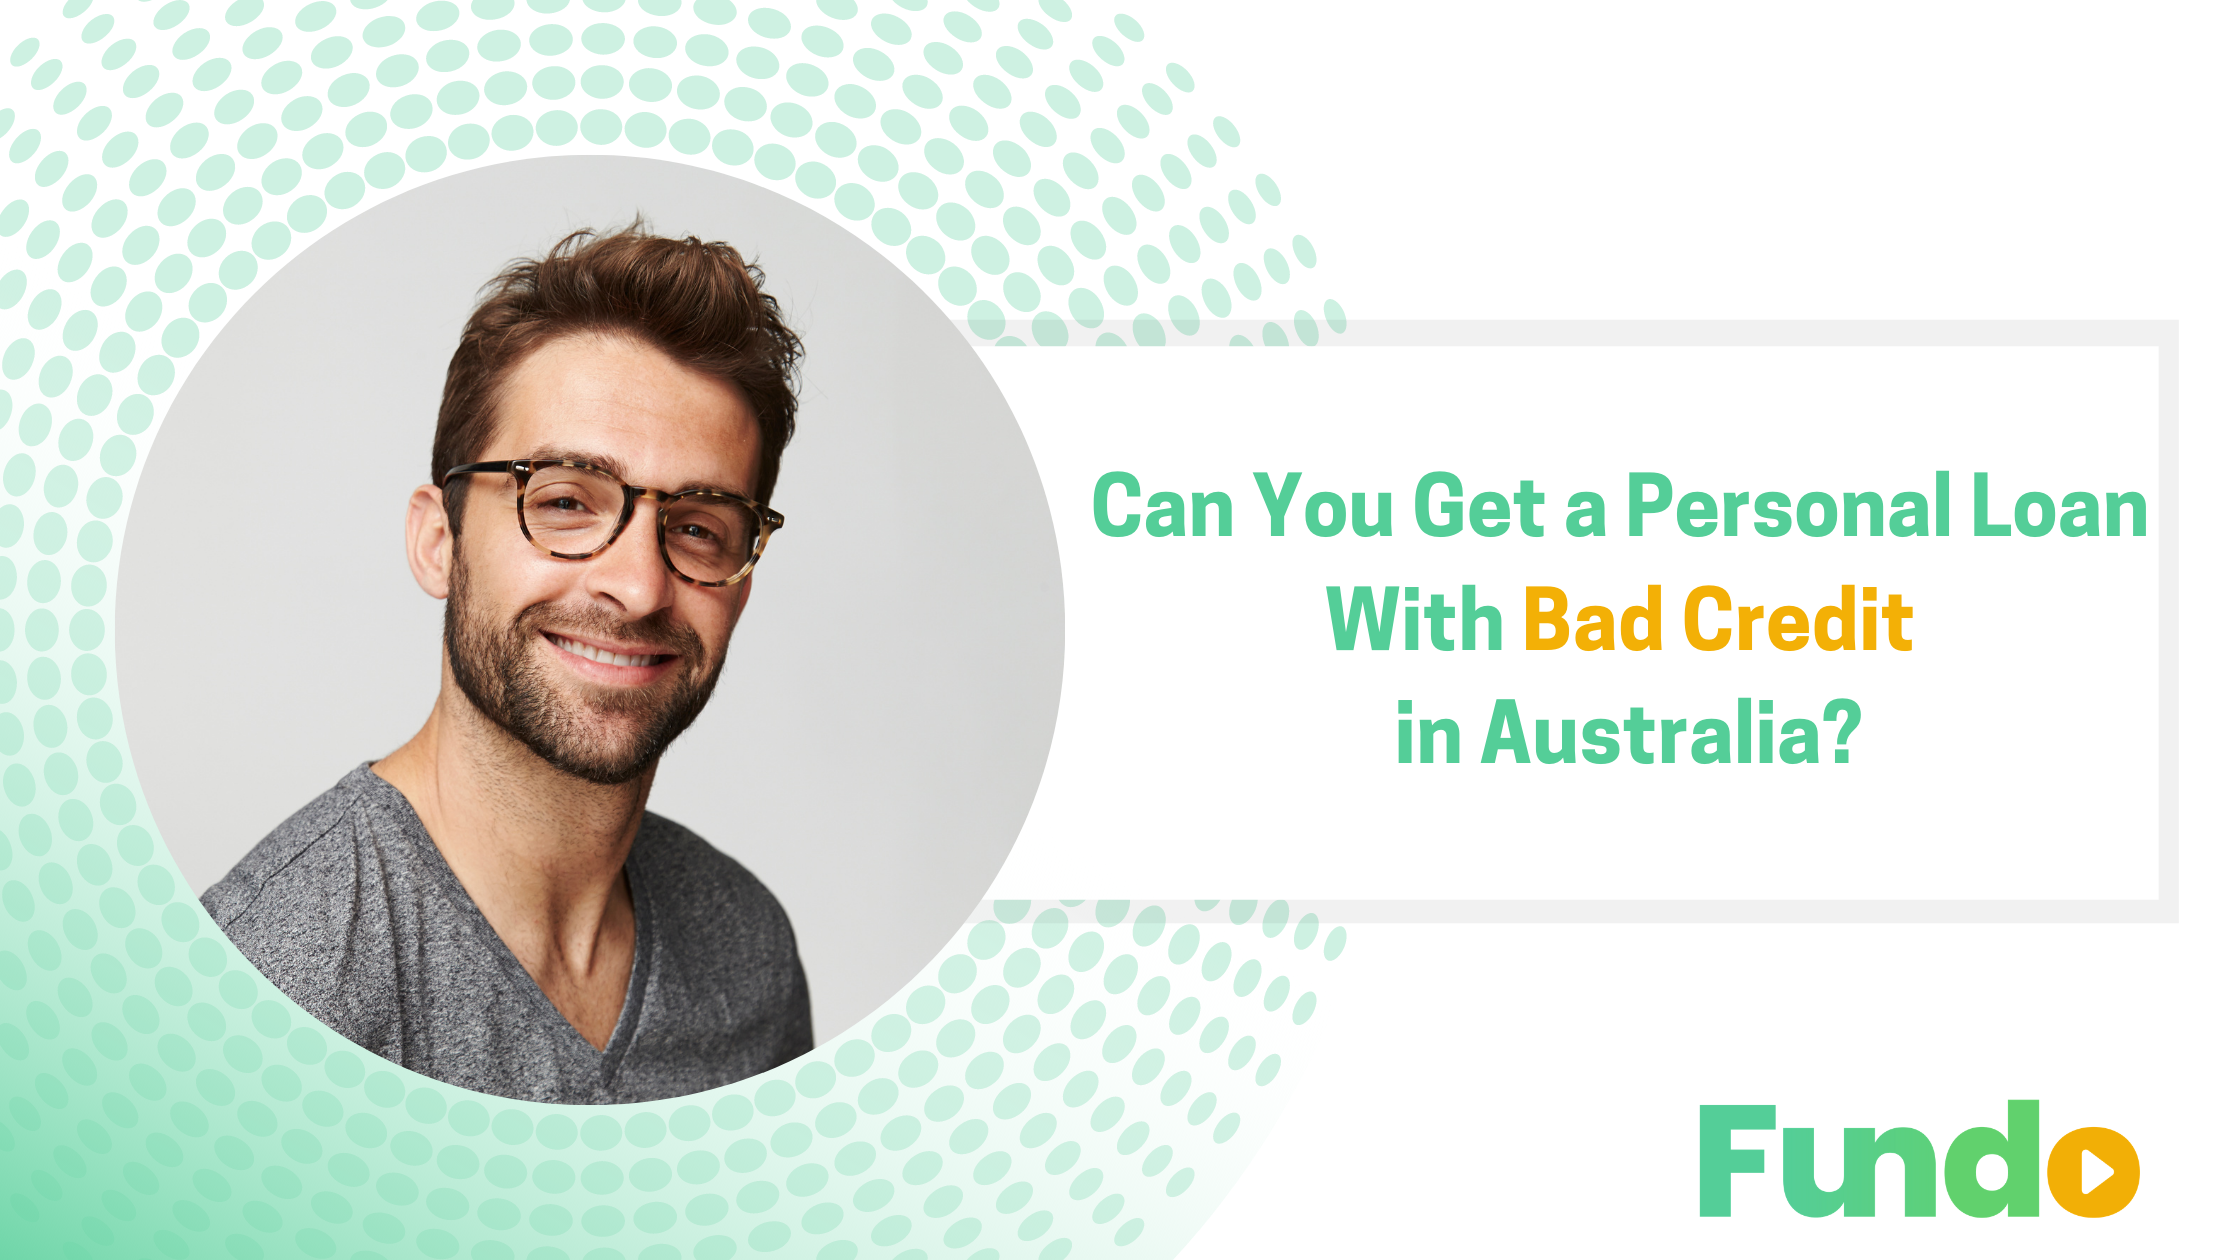 Can You Get a Personal Loan With Bad Credit in Australia?